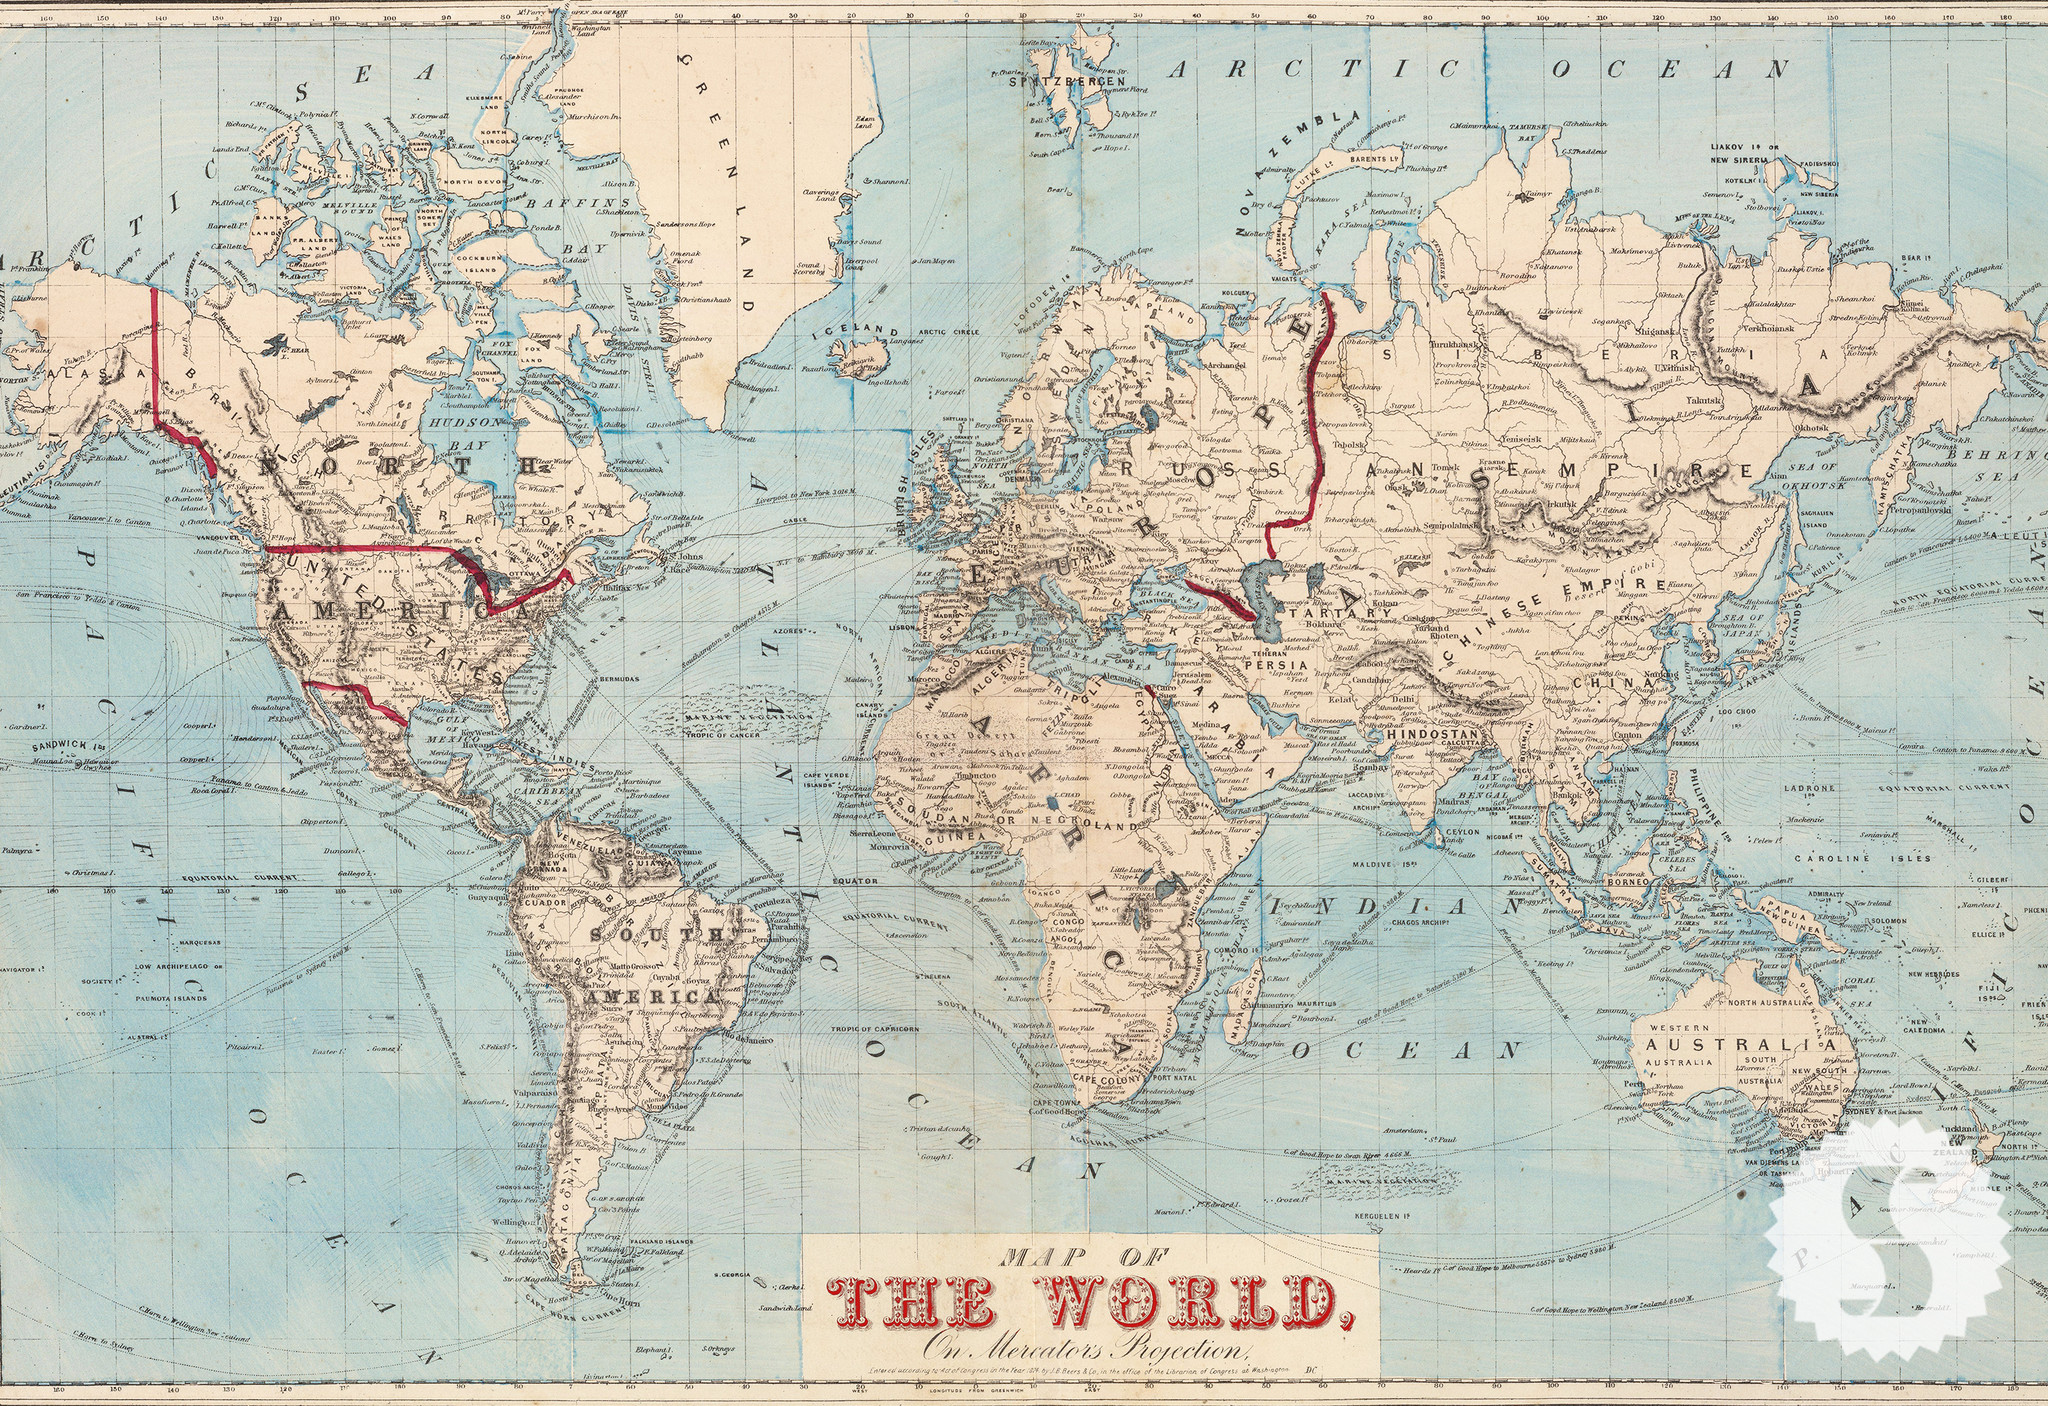 Vintage World Map - Philips New Commercial Map Of The World - HD Wallpaper 